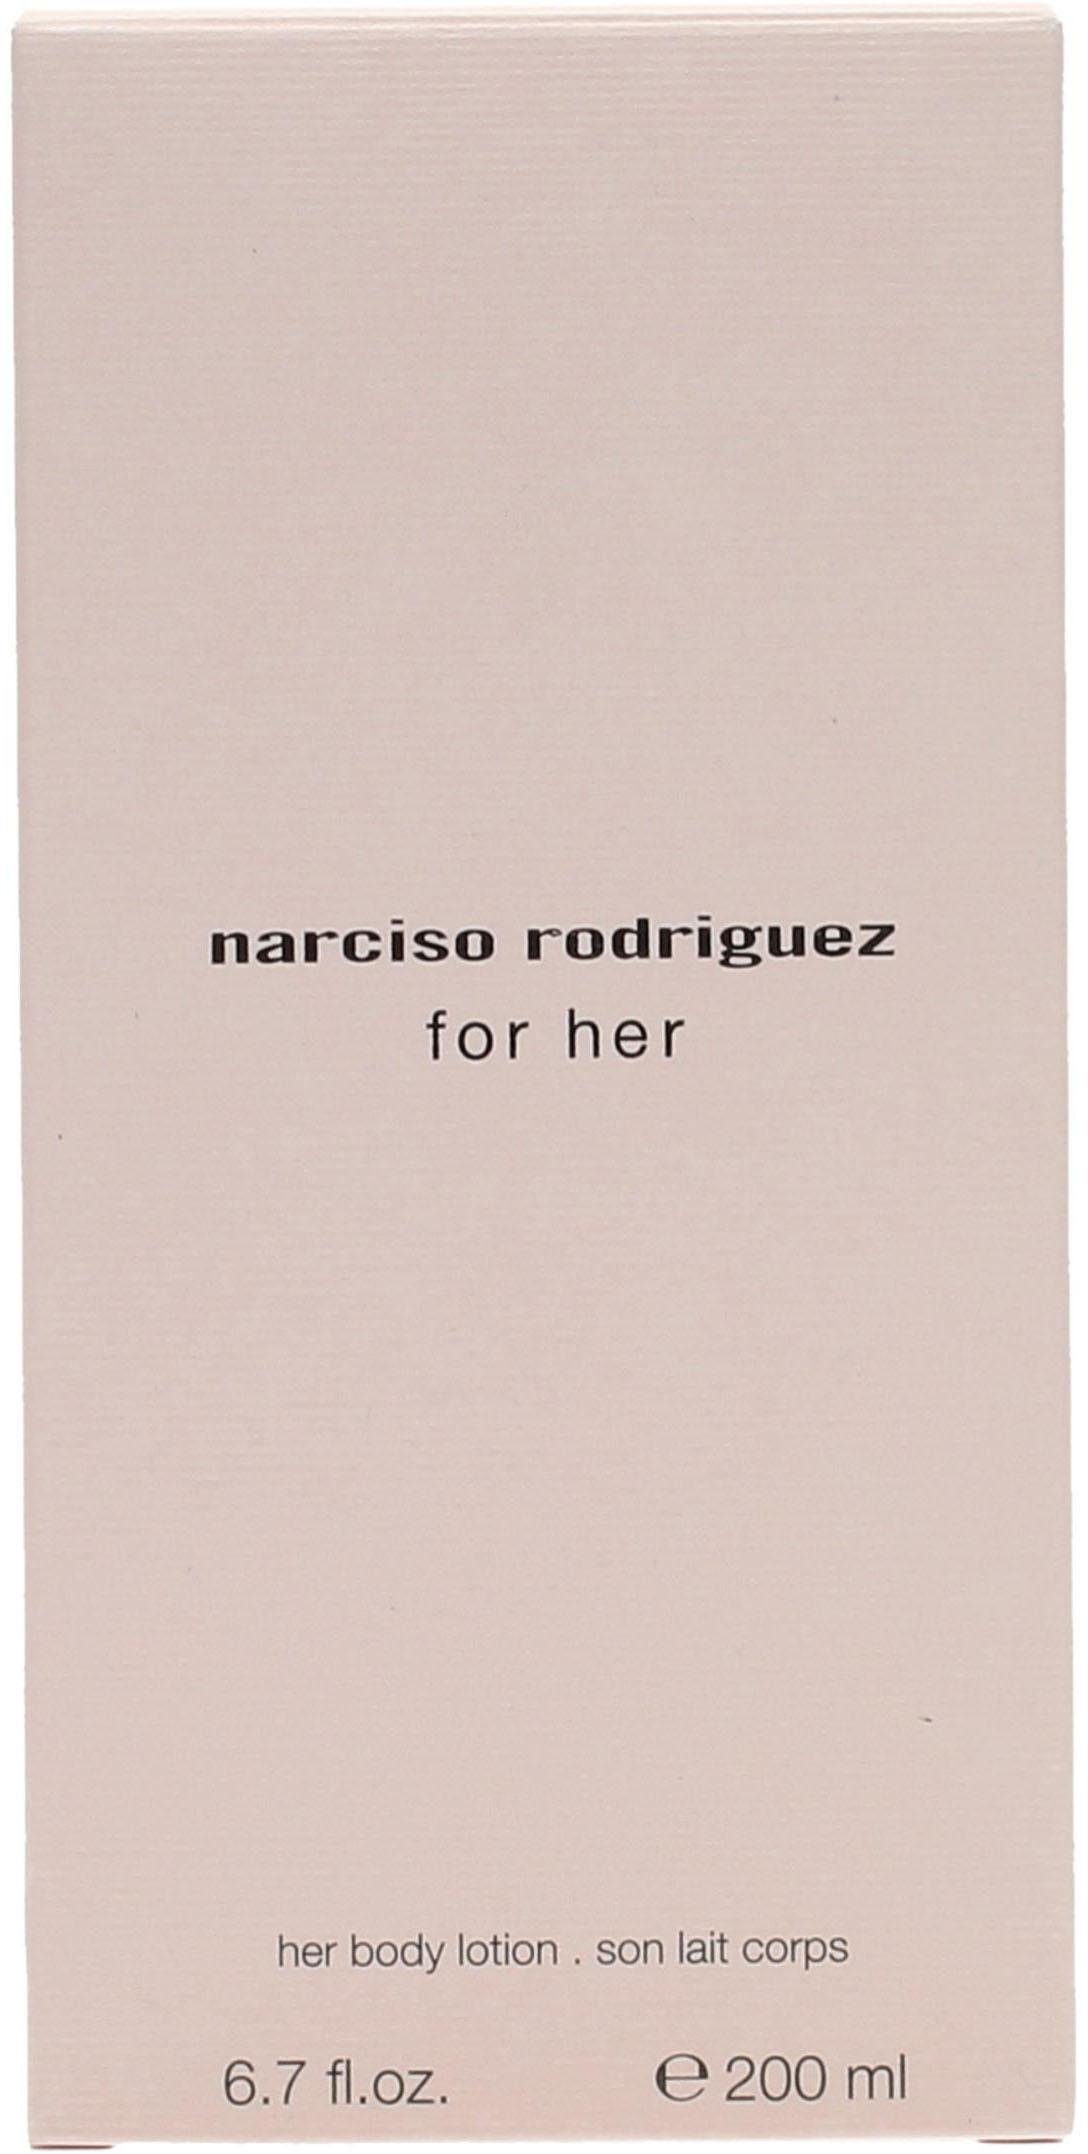 Her Bodylotion rodriguez narciso For